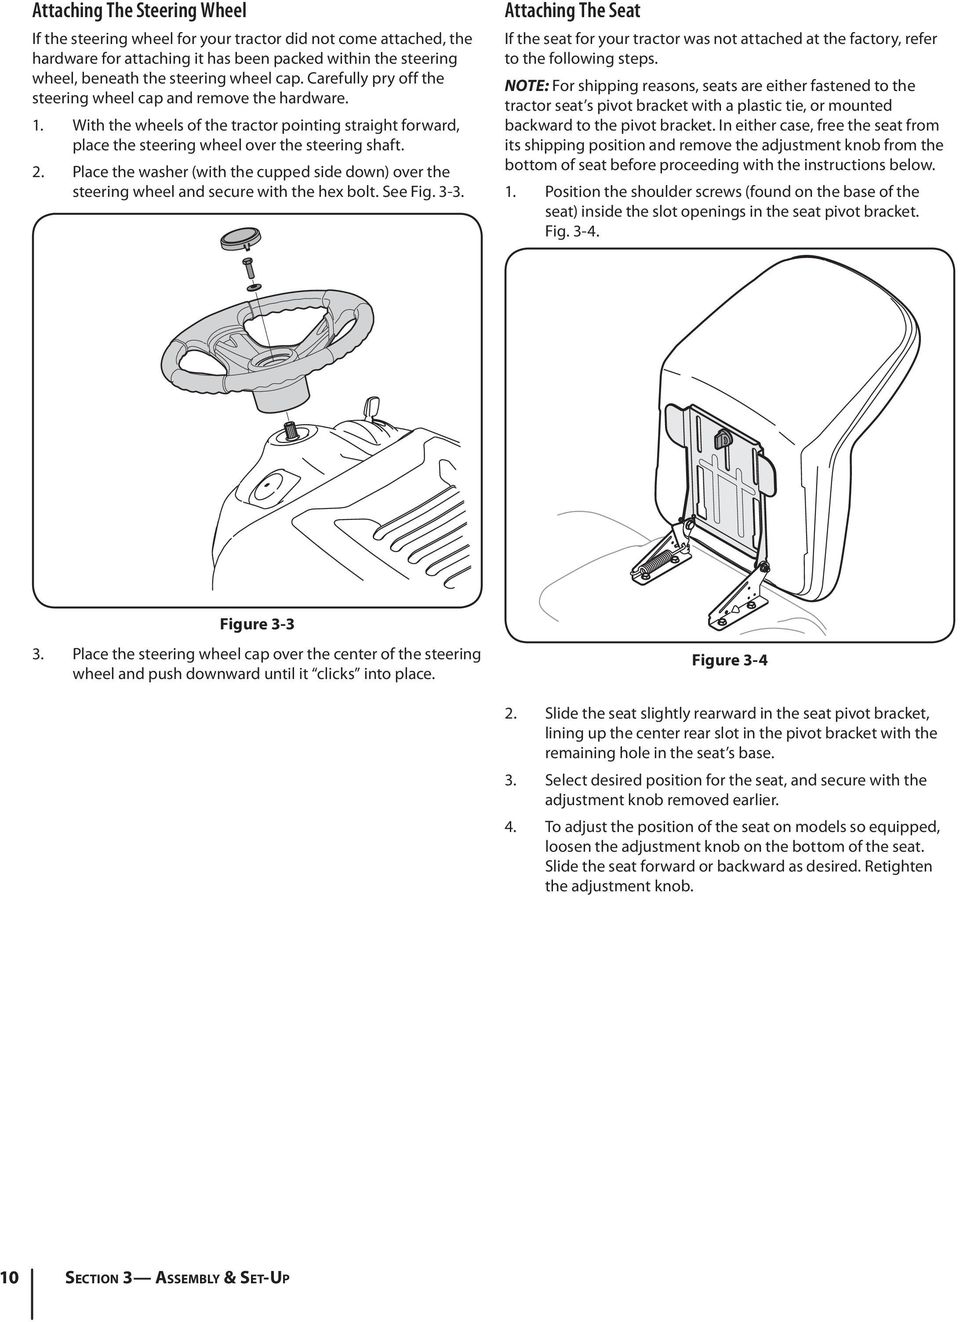 Place the washer (with the cupped side down) over the steering wheel and secure with the hex bolt. See Fig. 3-3.